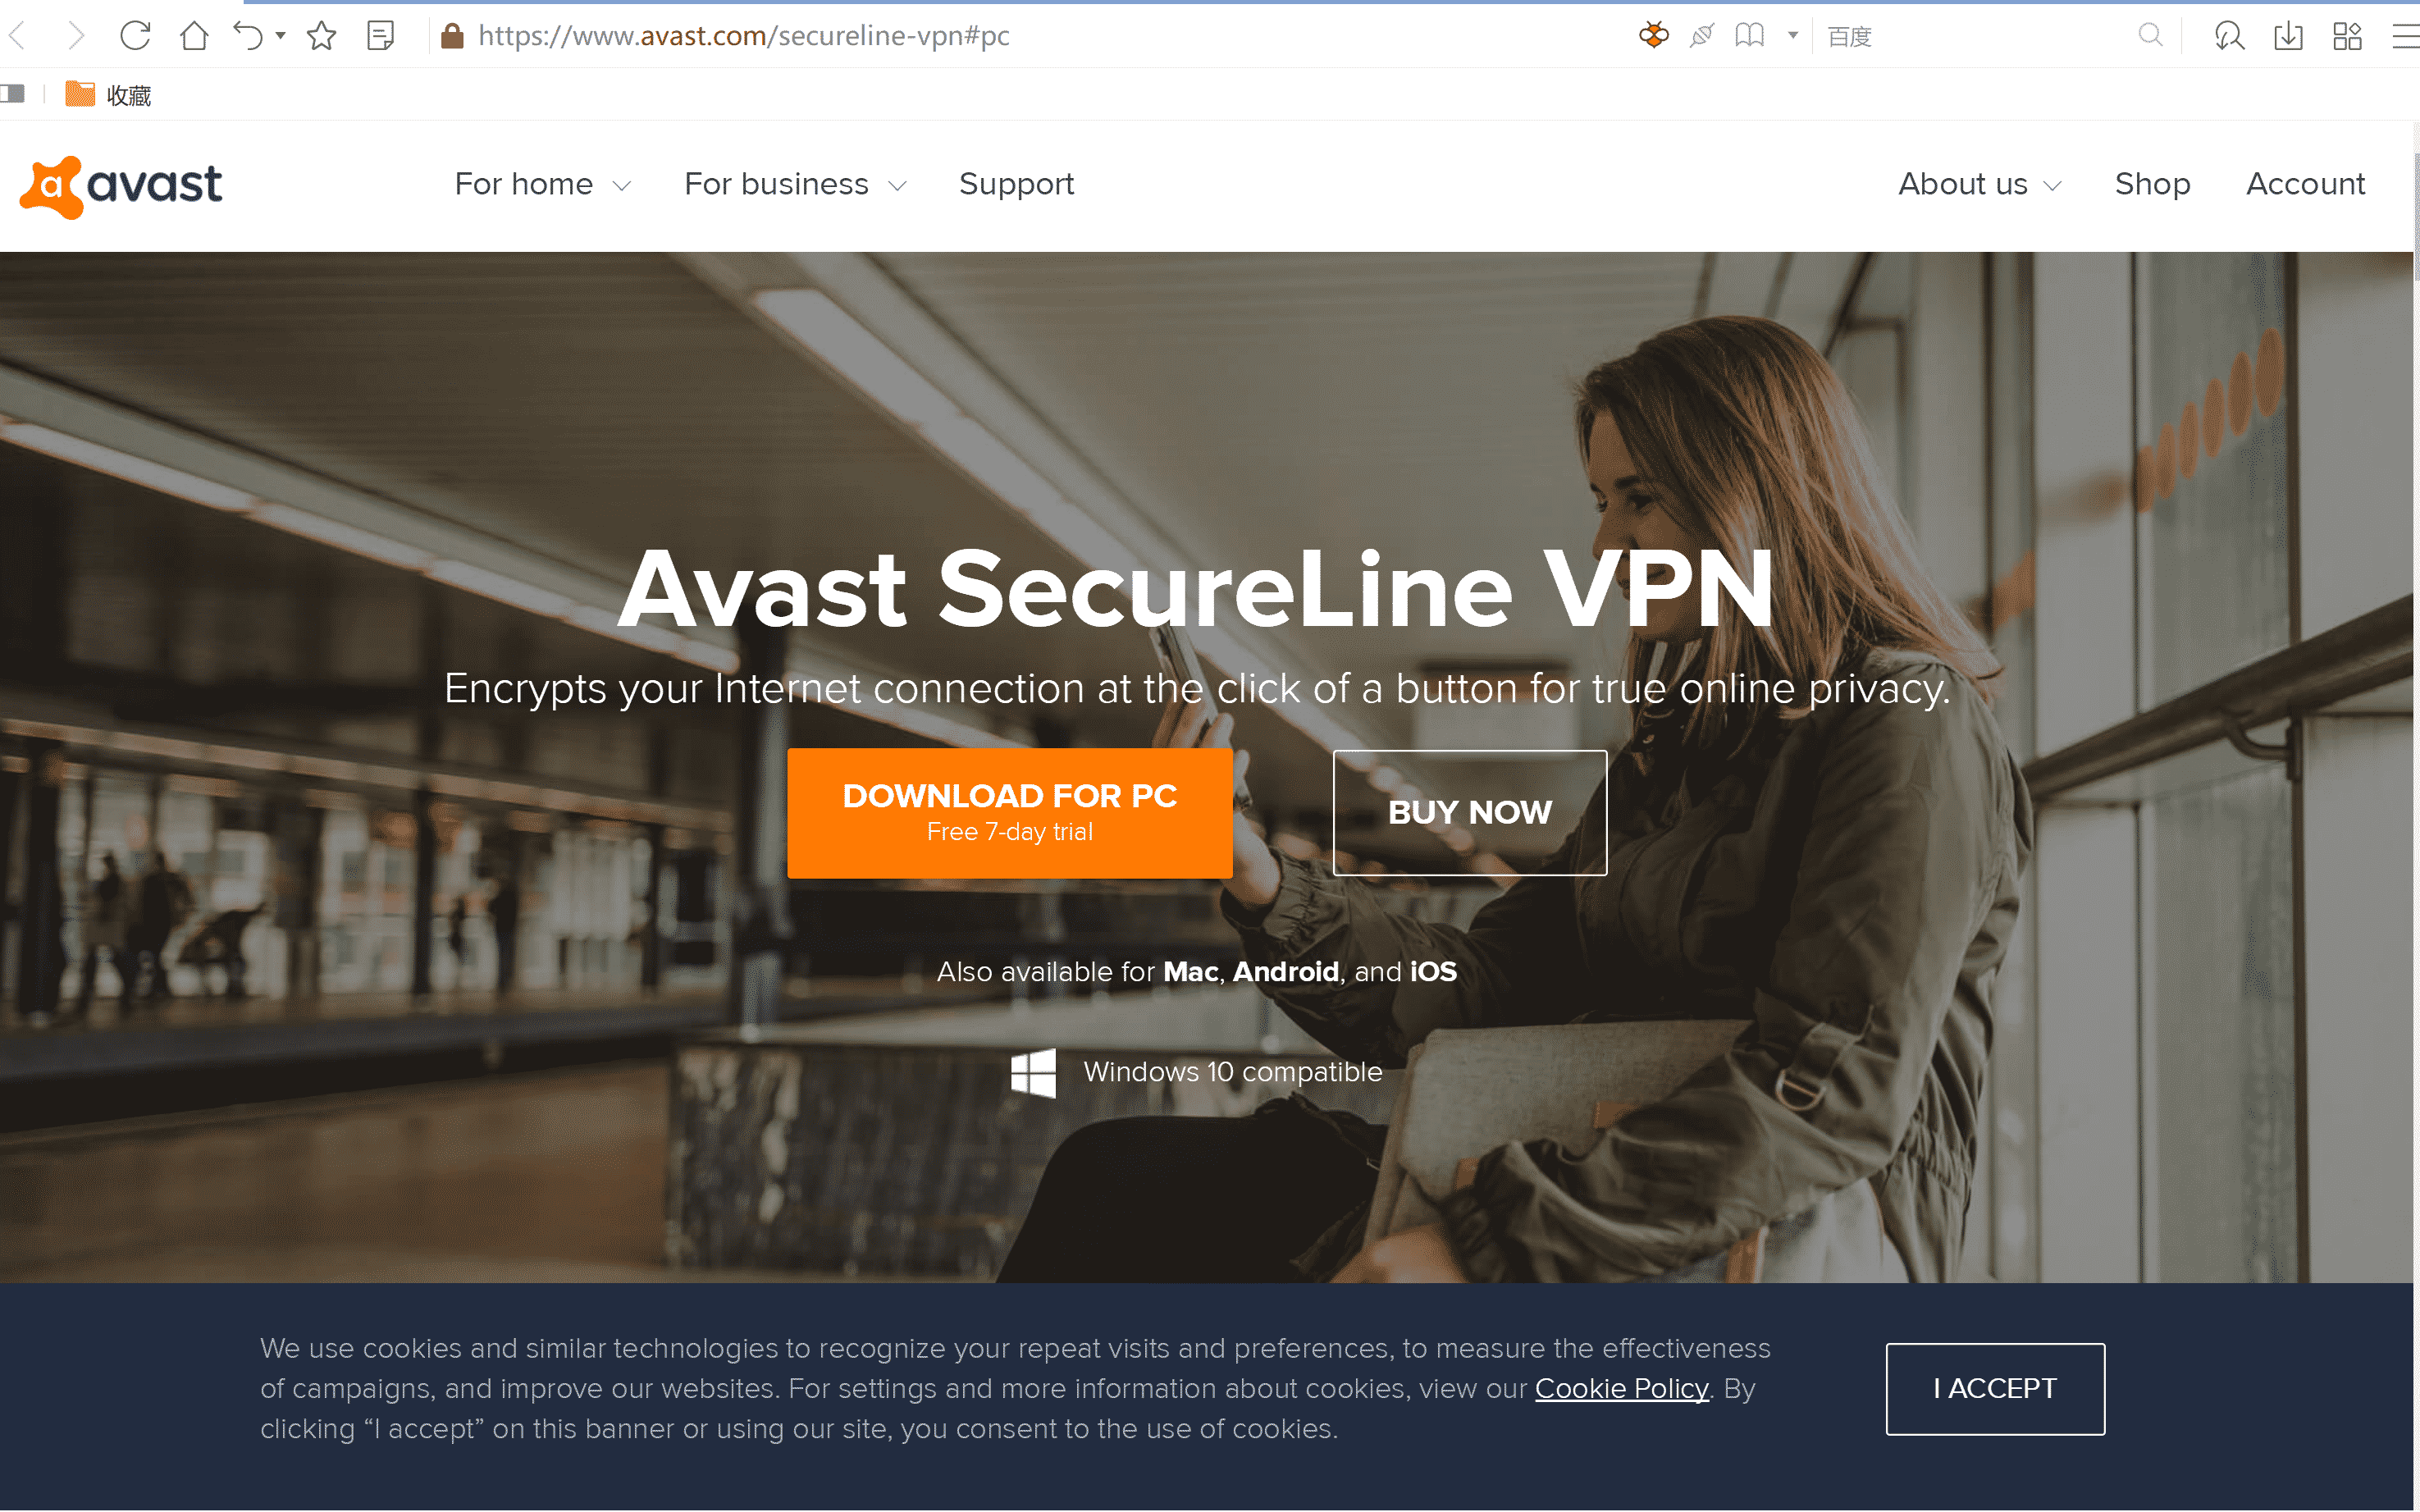 avast vpn service of 2018 review